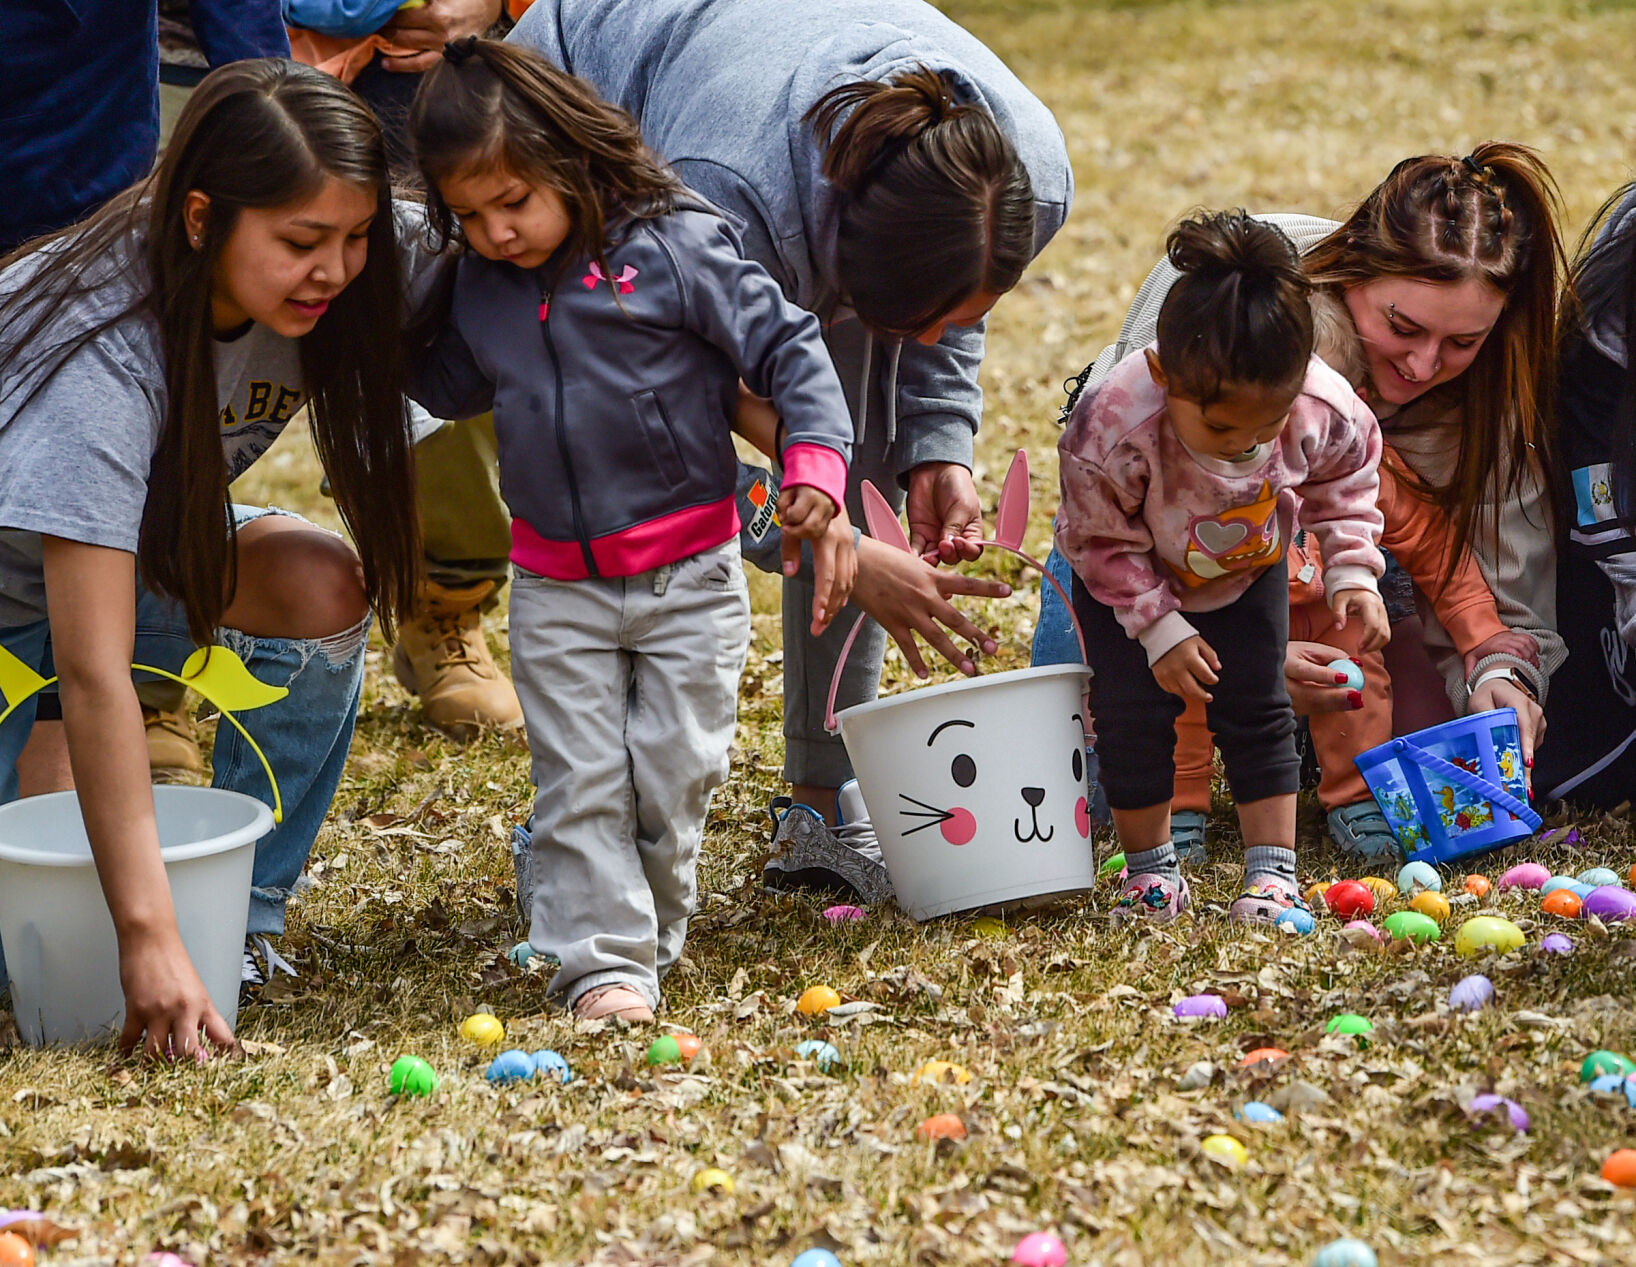 Photos: South Side Easter Egg Hunt at South Park draws large crowd